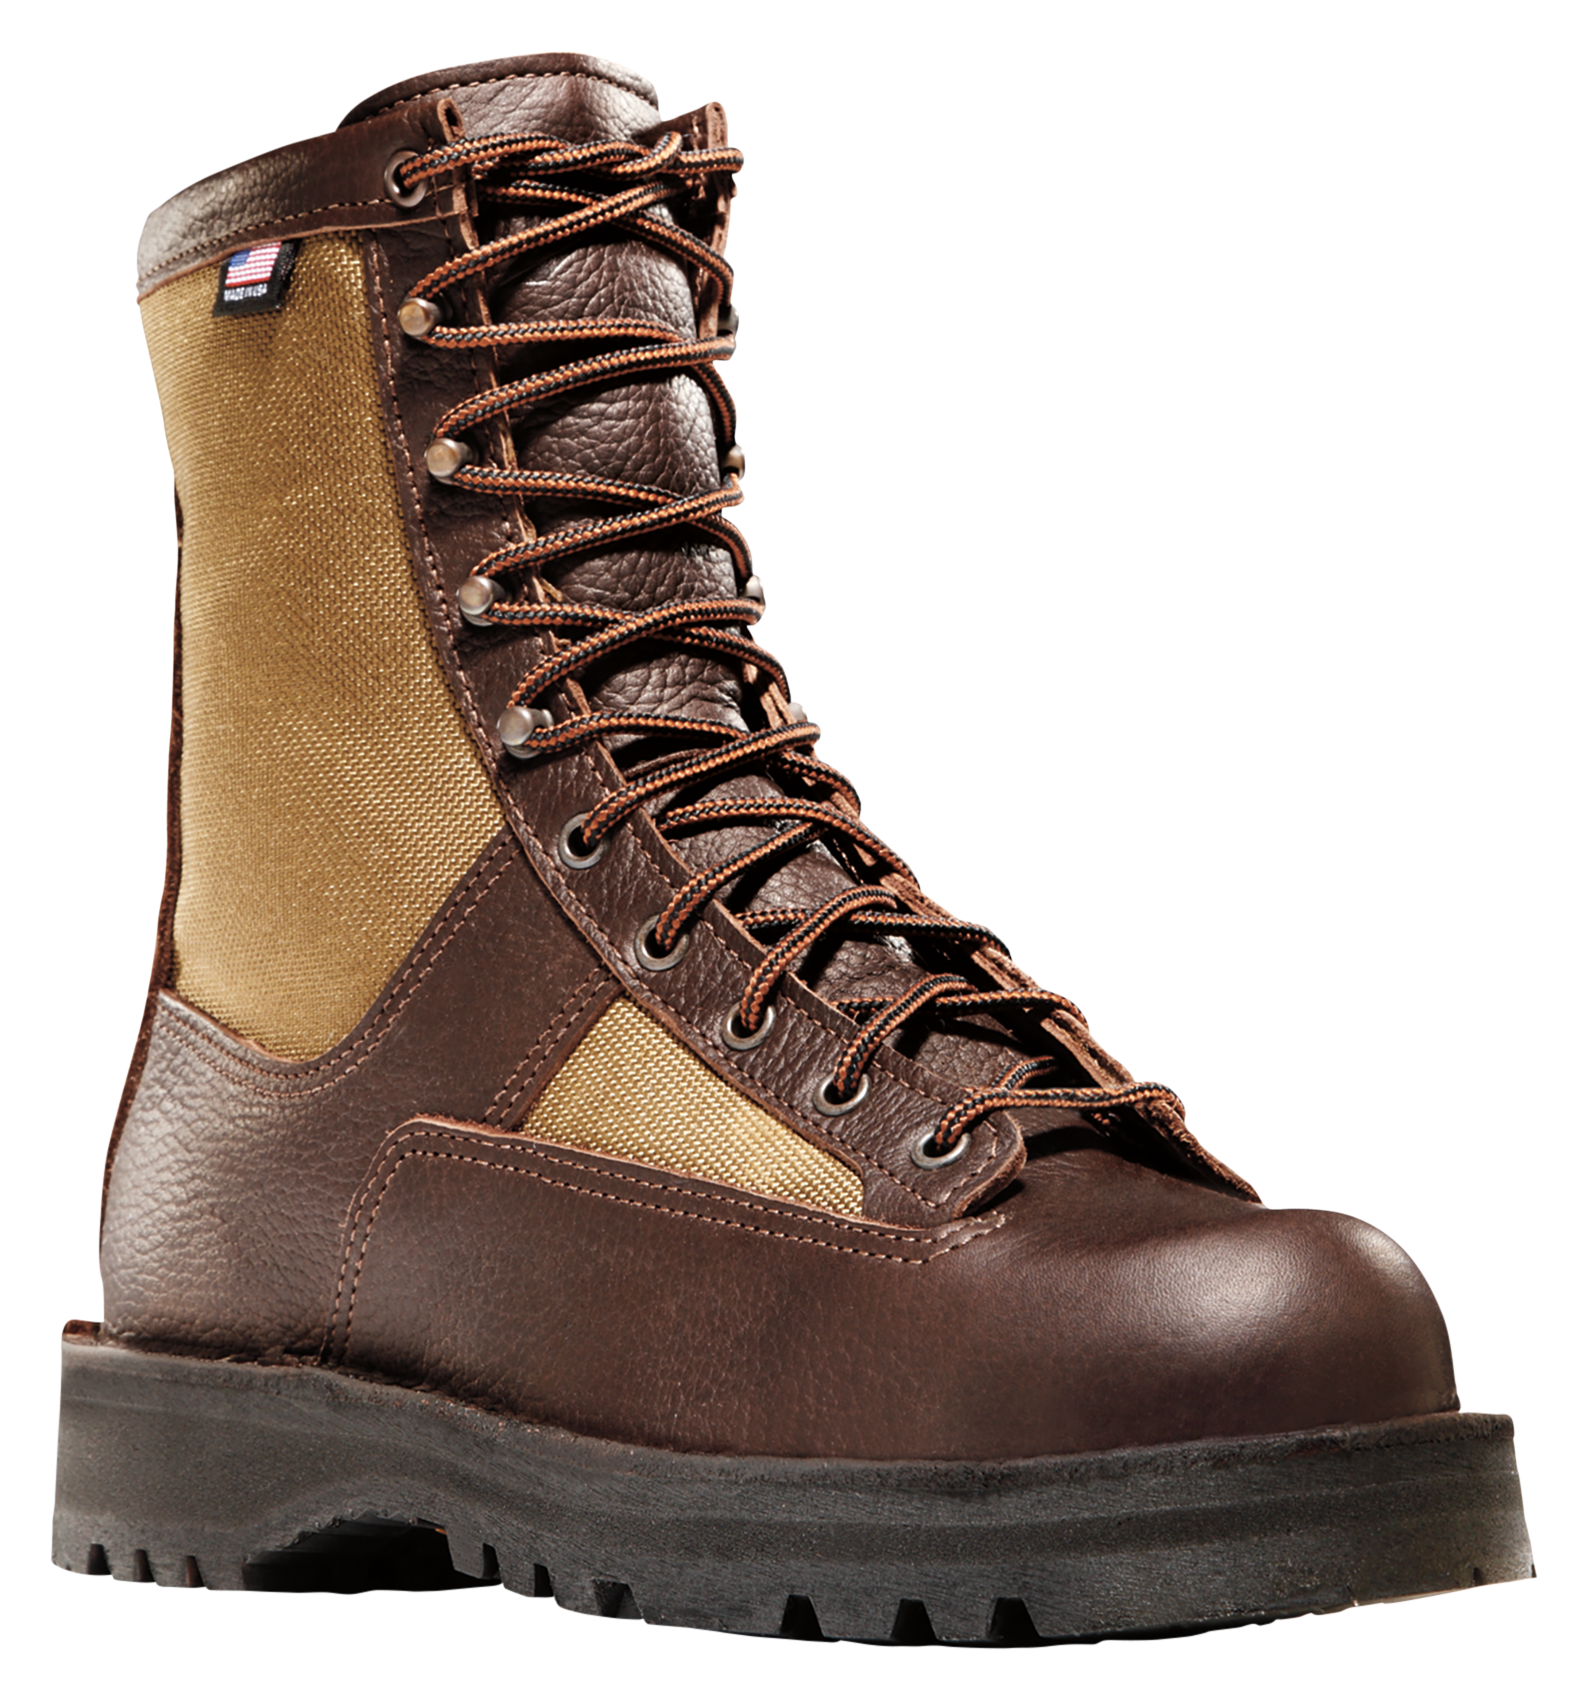 Danner Sierra GORE-TEX Insulated Hunting Boots for Men - Brown - 6W